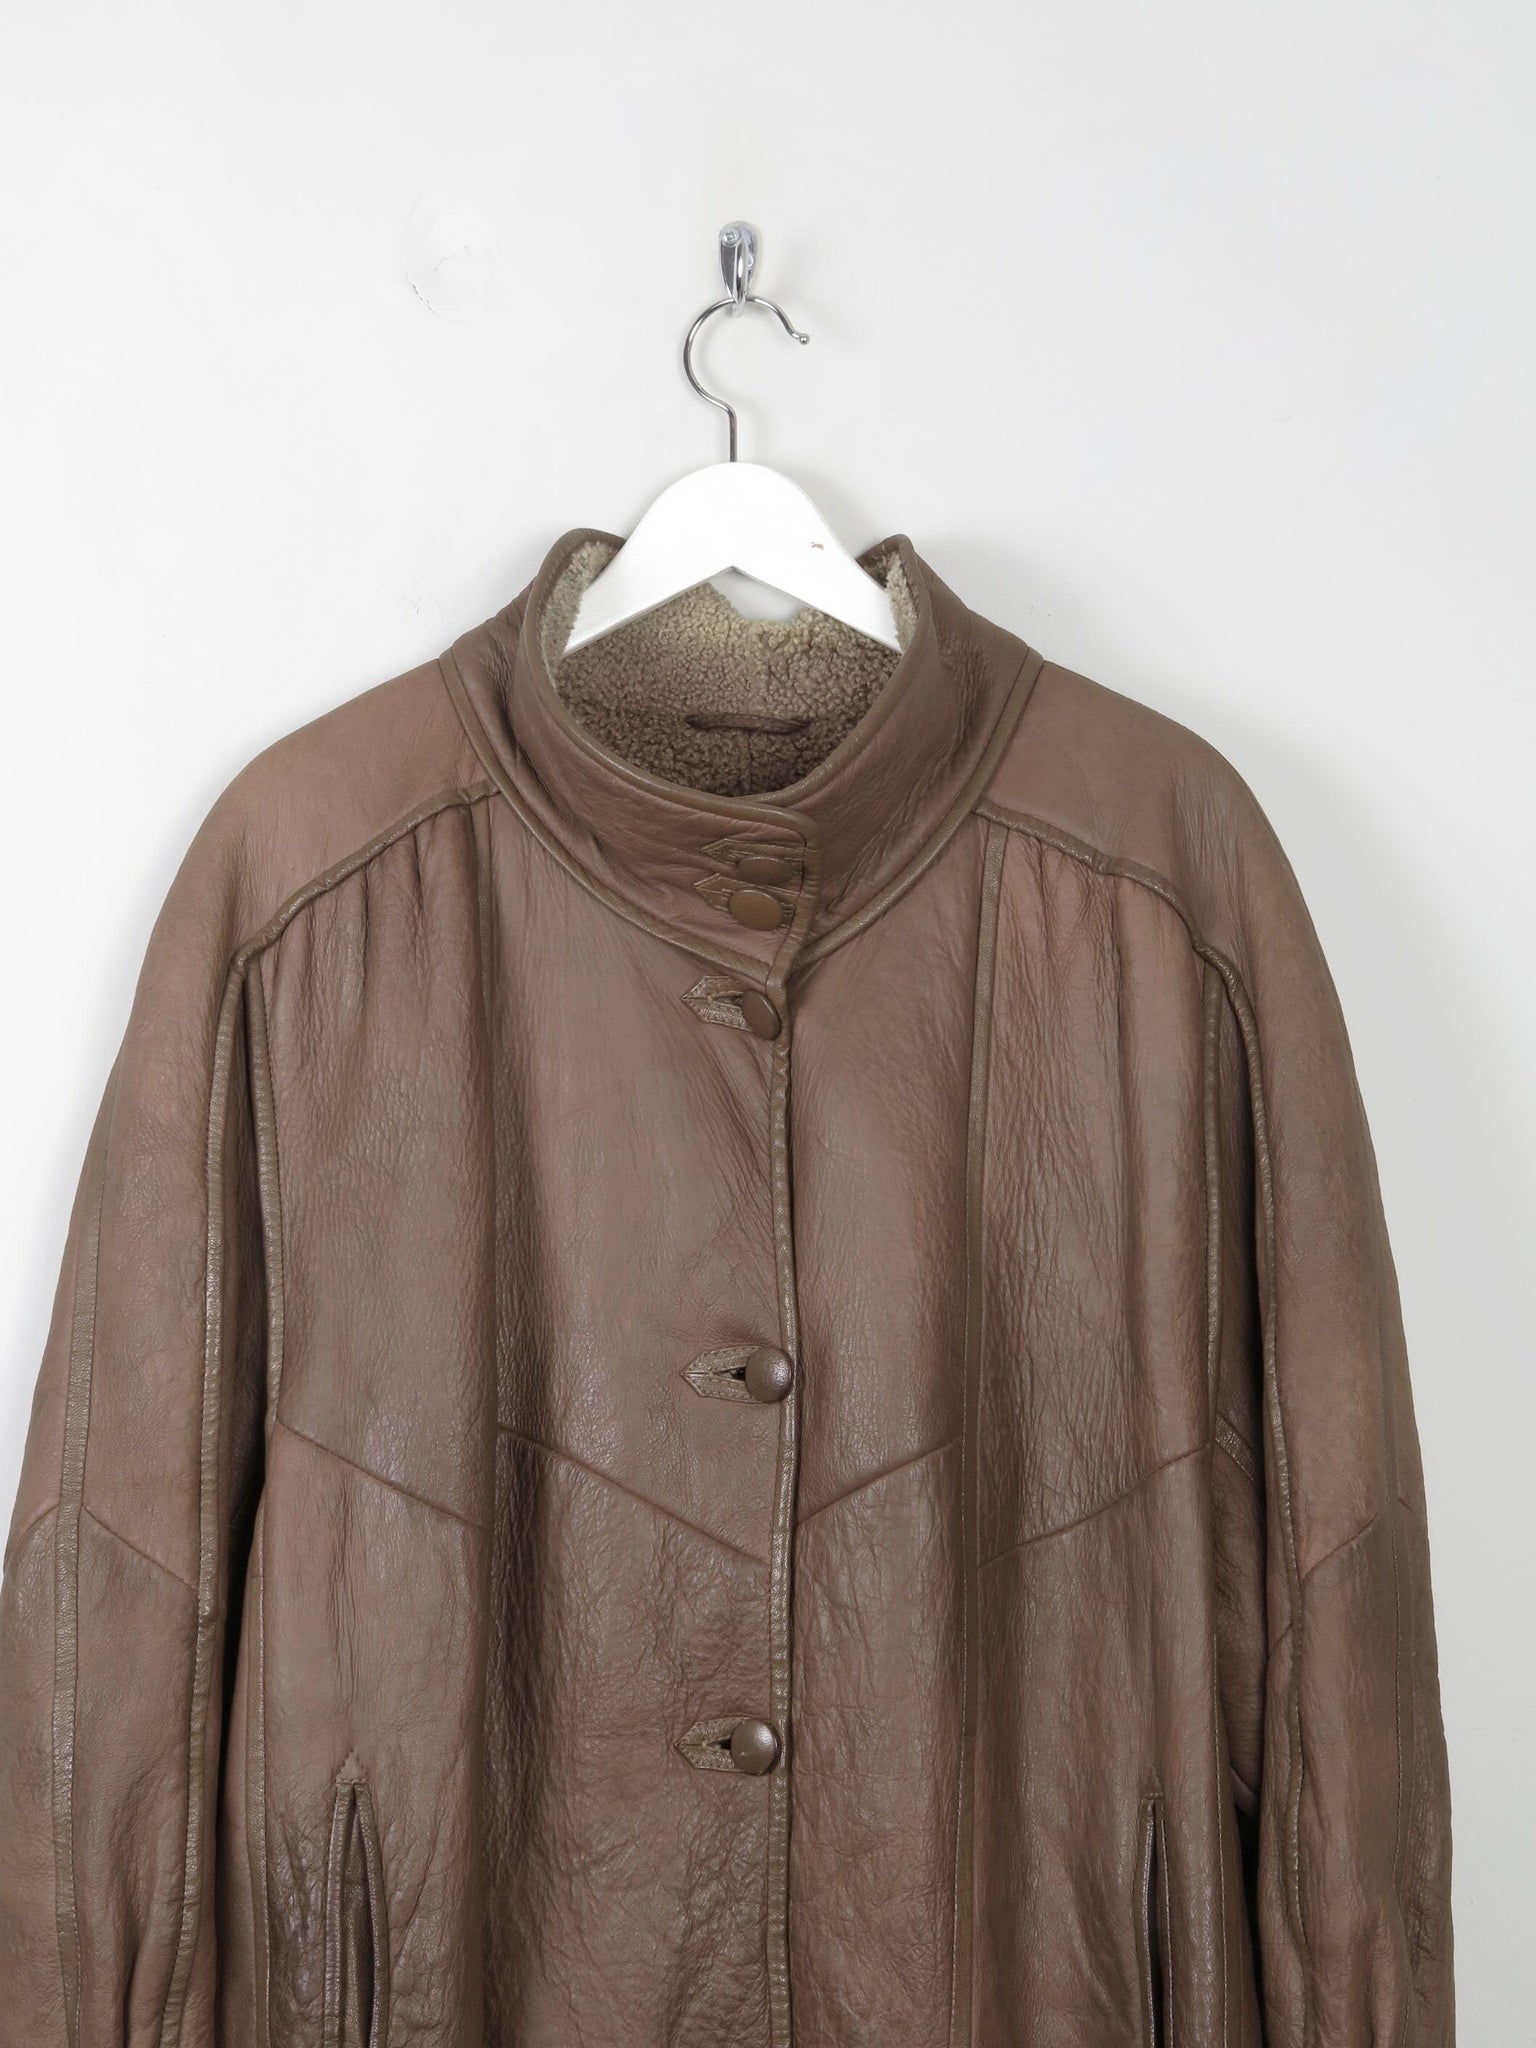 Women's Taupe Brown Vintage Shearling Short Coat M/L - The Harlequin